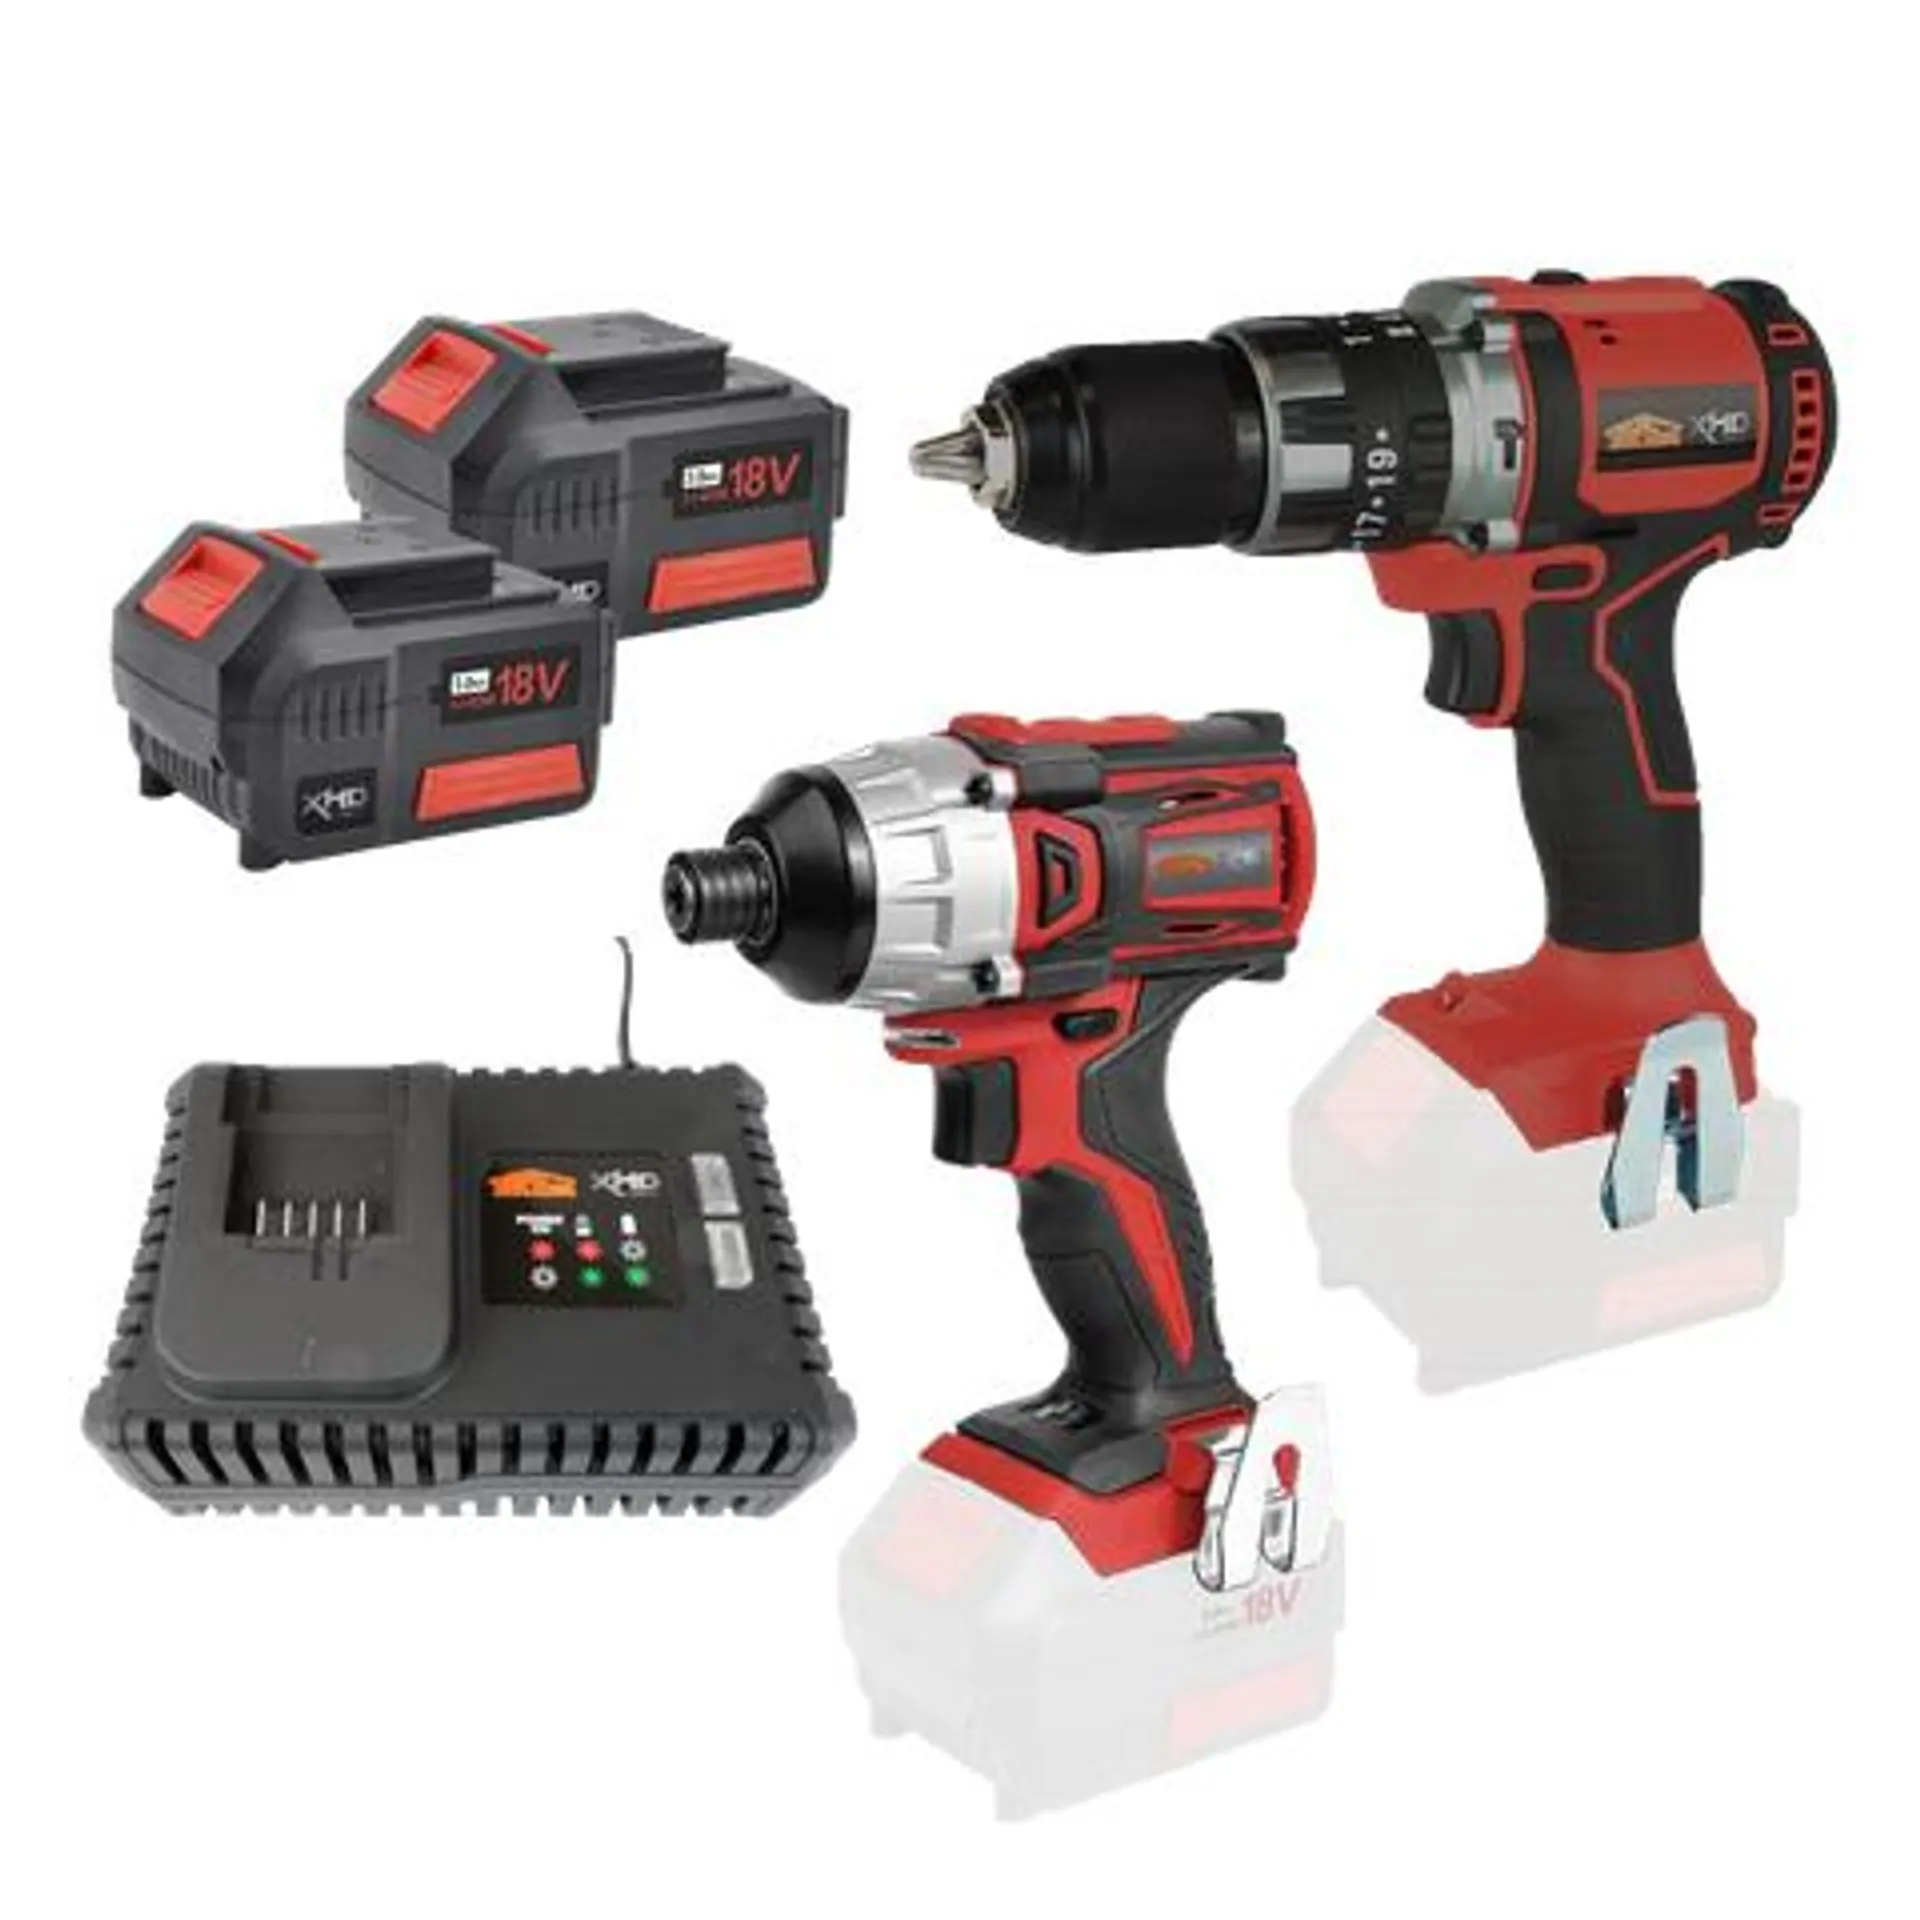 ToolShed XHD Cordless Hammer Drill and Impact Driver Brushless 18V 3Ah